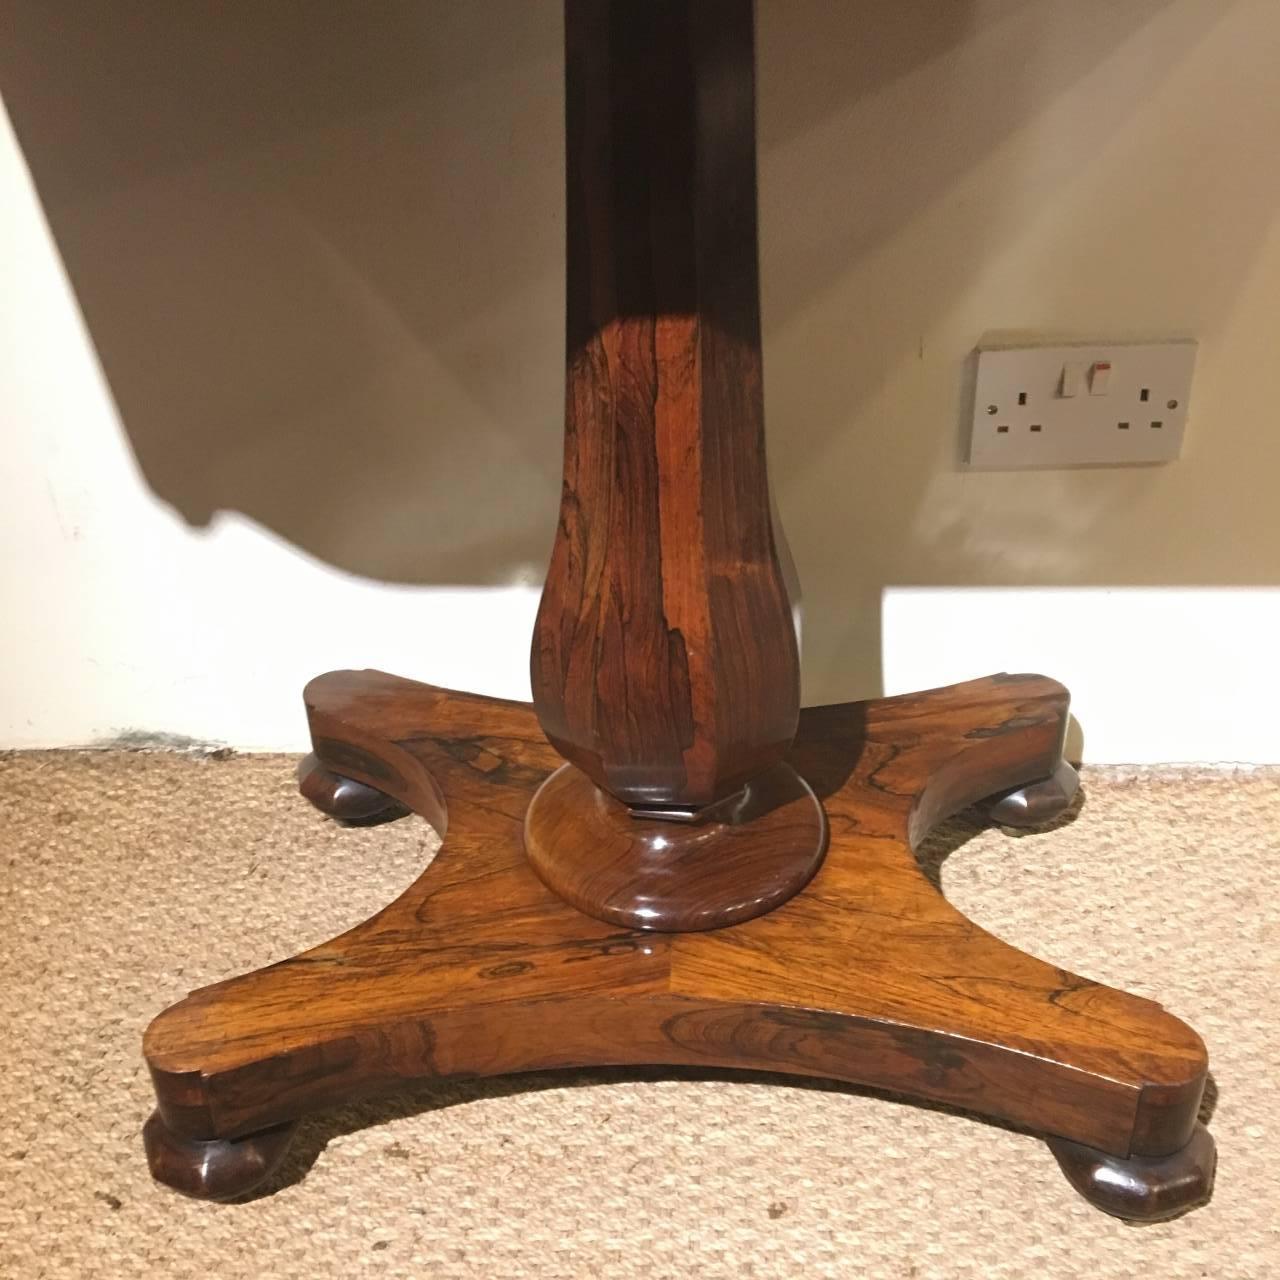 Fine quality Rosewood card table, English, circa 1830.

This delightful card table has been well cared for and is in exceptional condition. We have lightly refurbished, then wax polished it to show off the beauty of the figured rosewood. The top